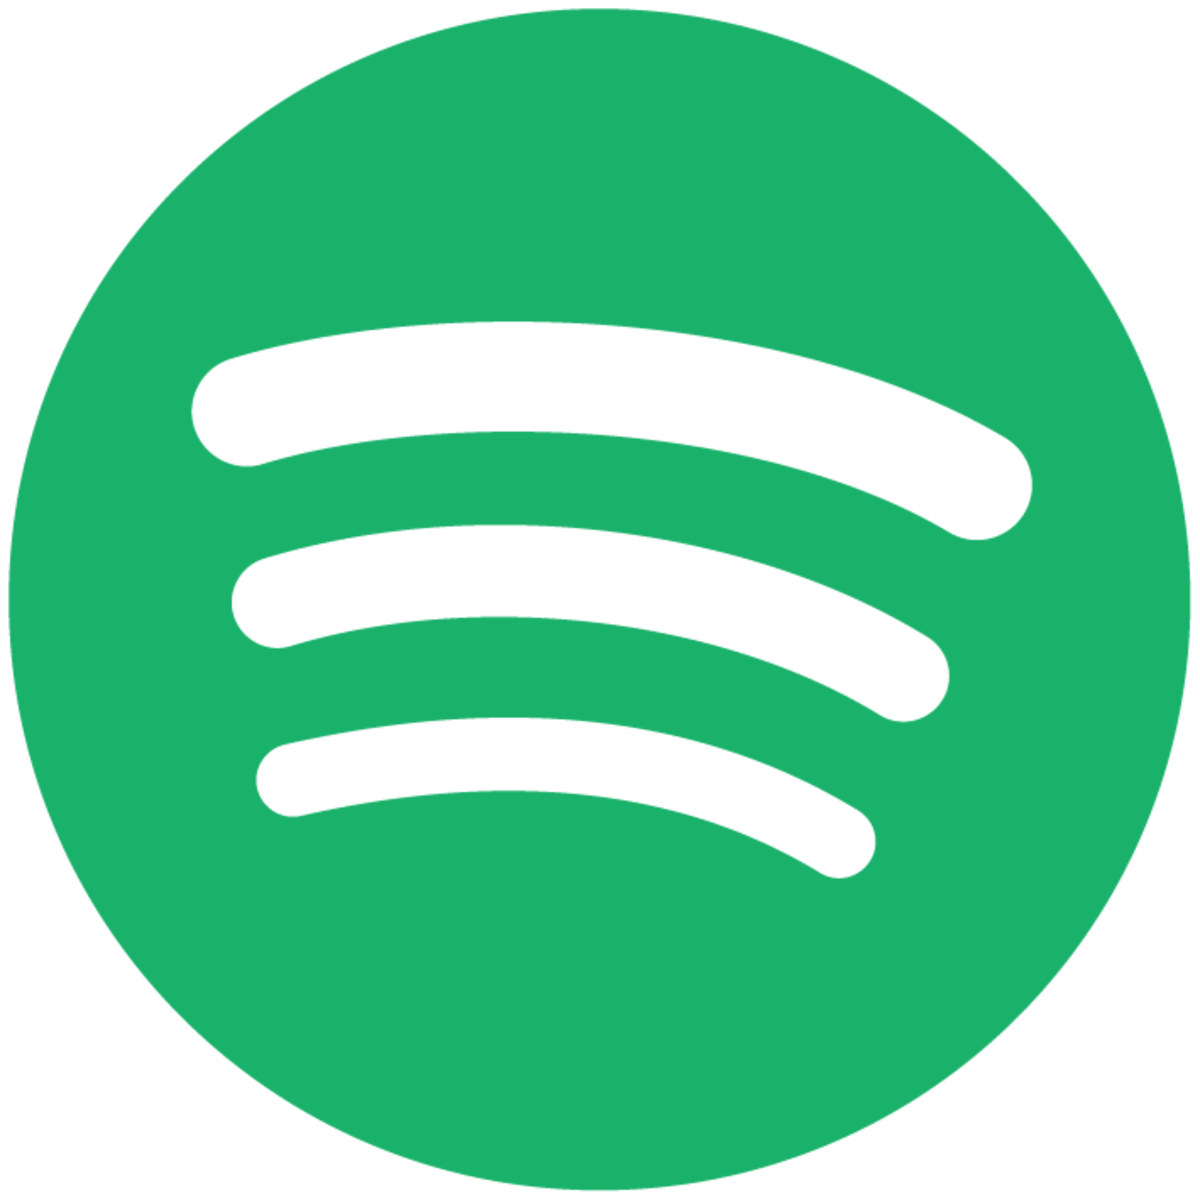 Spotify Music: Amazon.in: Appstore for Android